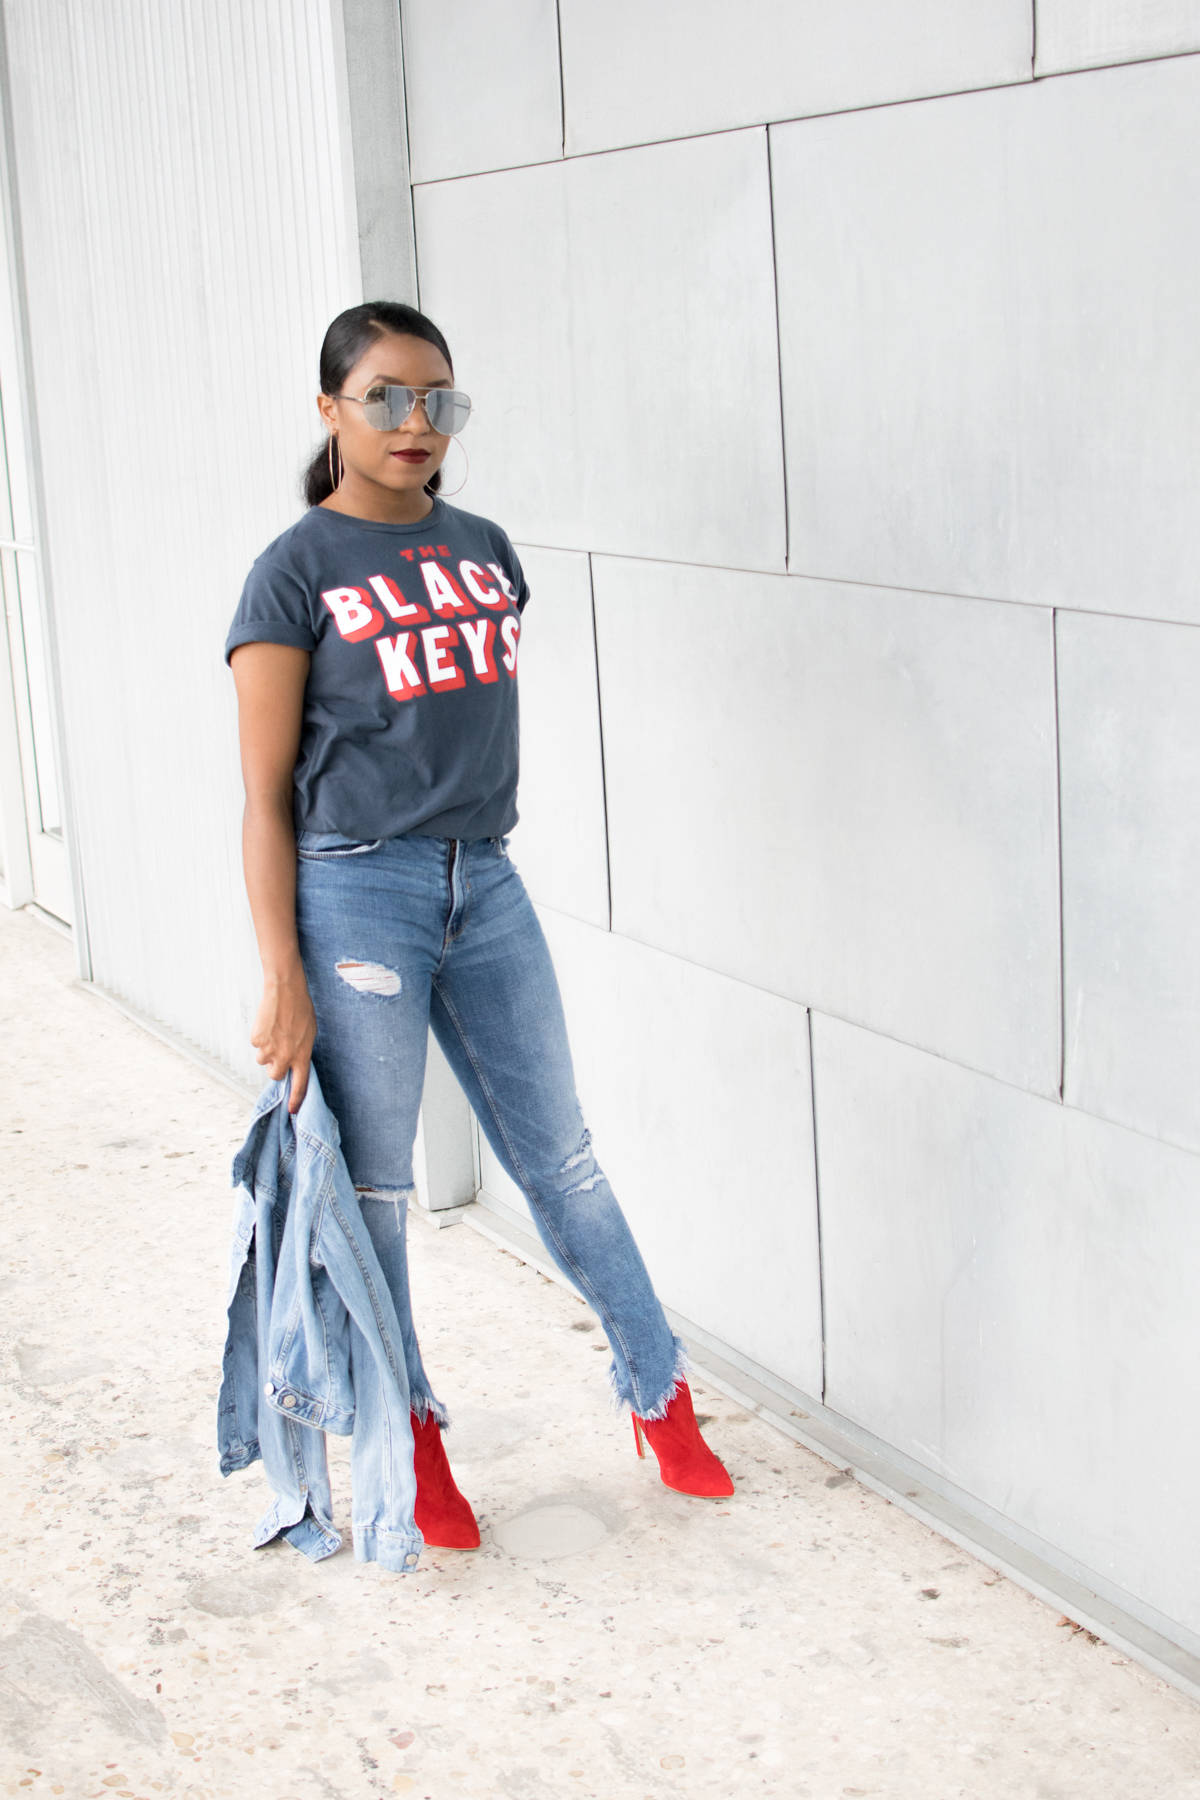 Styling a Graphic Tee and Heels - Venti ...